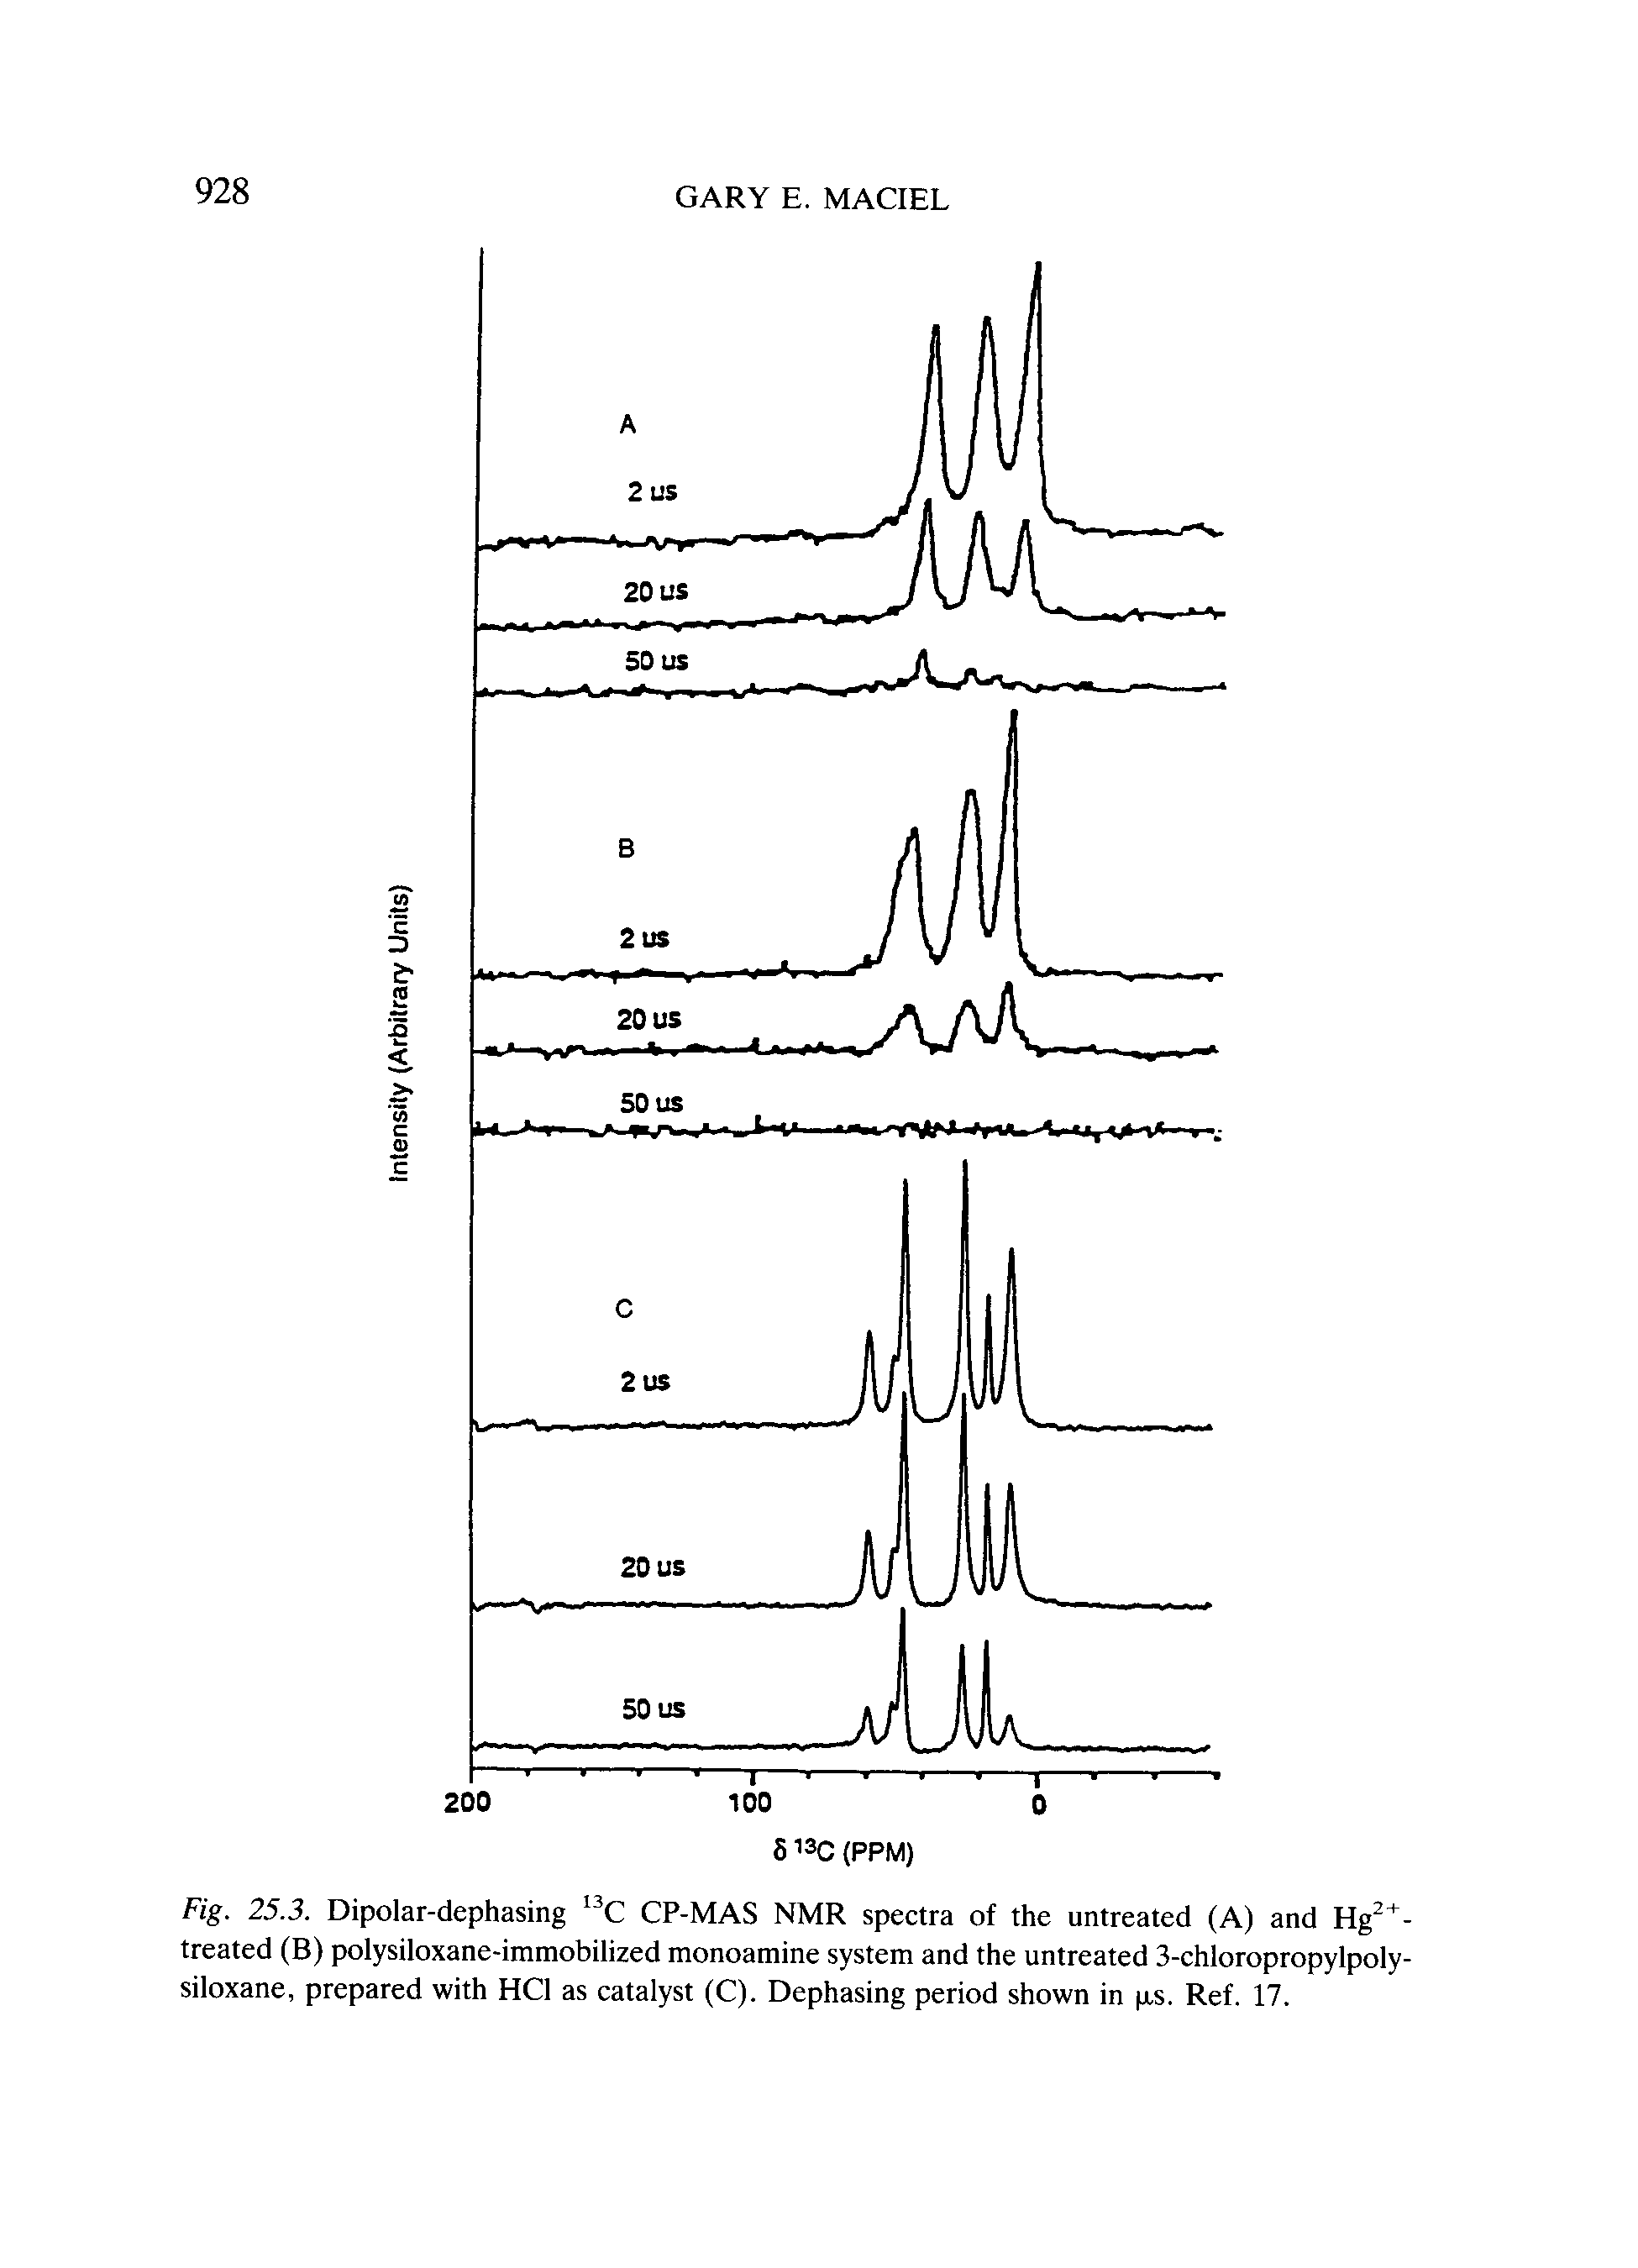 Fig. 25.3. Dipolar-dephasing CP-MAS NMR spectra of the untreated (A) and Hg -treated (B) polysiloxane-immobilized monoamine system and the untreated 3-chloropropylpoly-siloxane, prepared with HCl as catalyst (C). Dephasing period shown in p,s. Ref. 17.